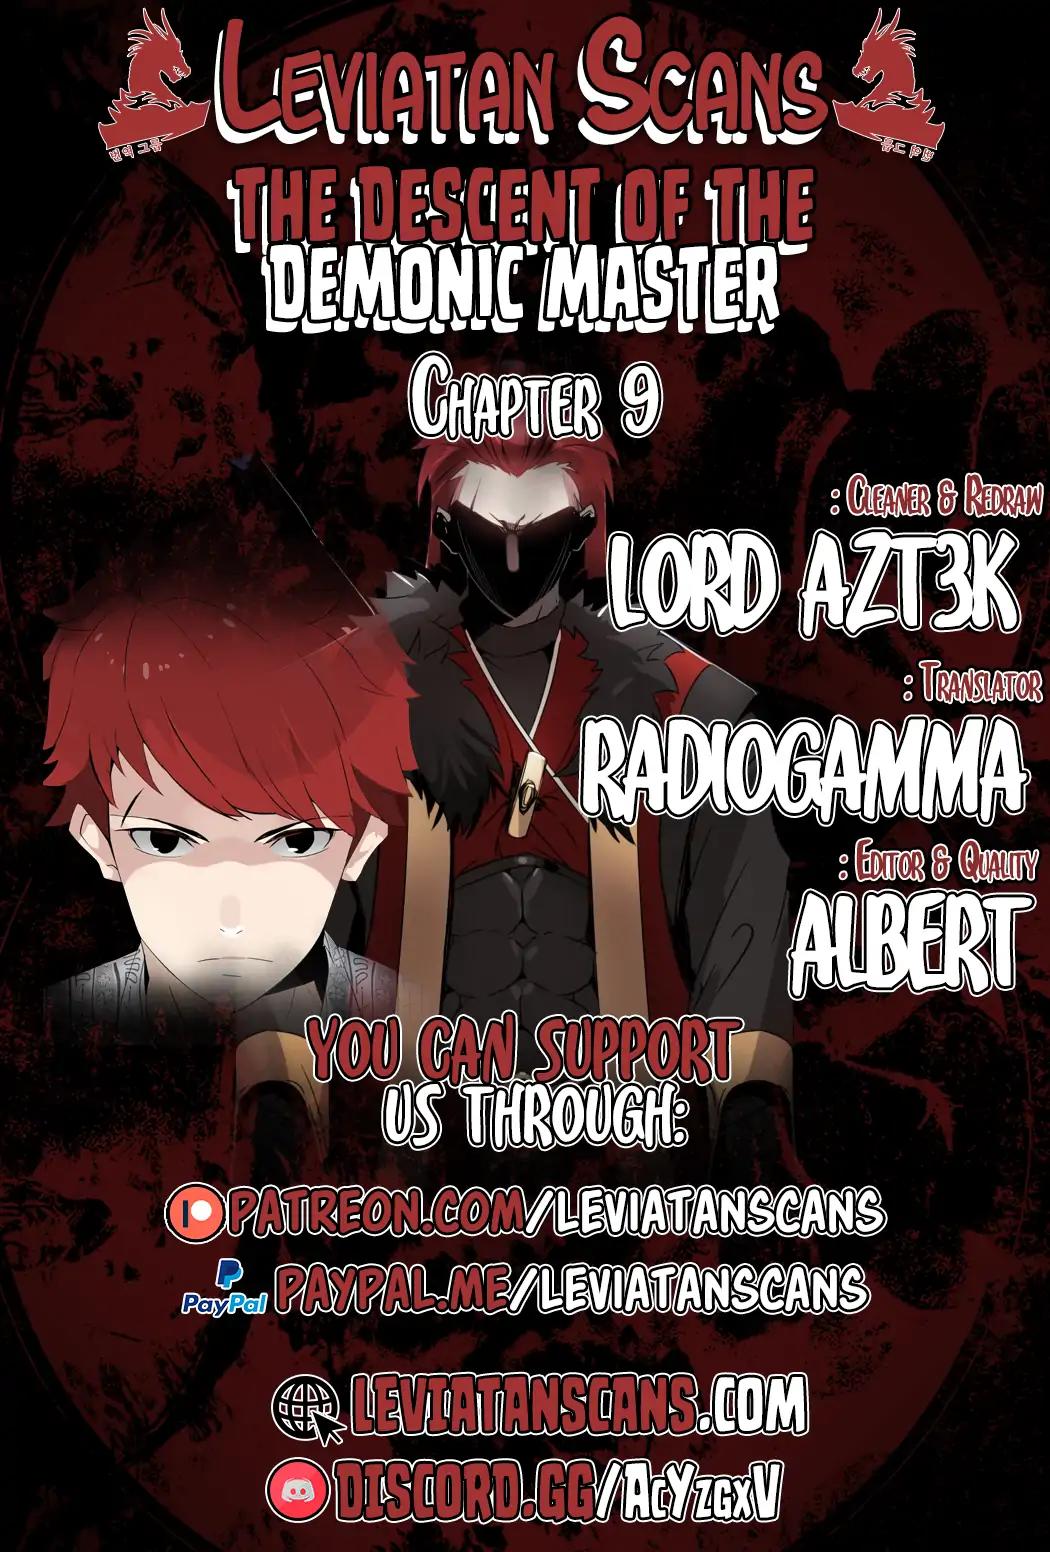 The Descent of the Demonic Master Chapter 9